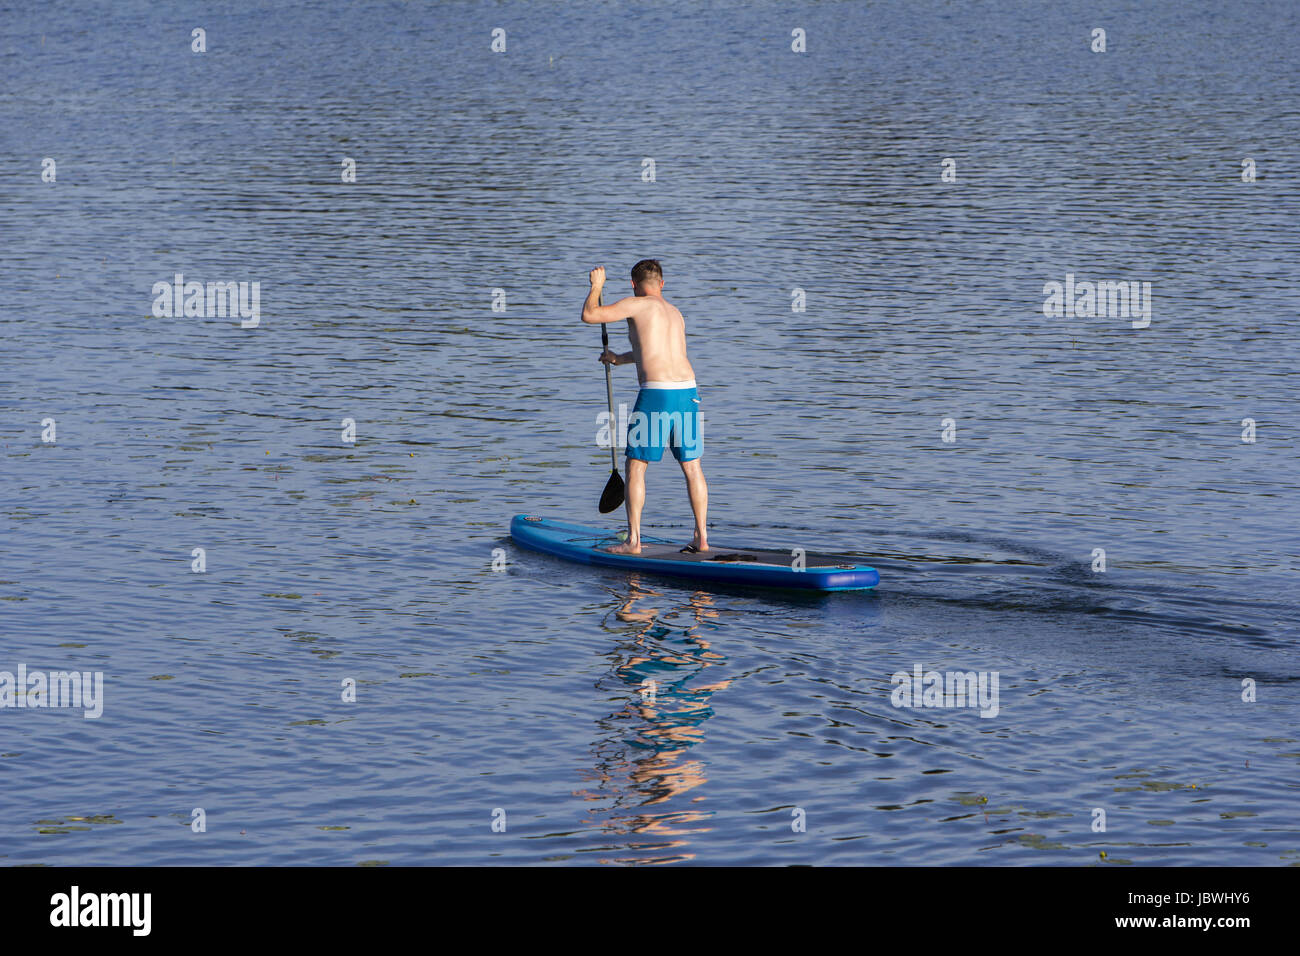 Man on Paddle Board paddling out au lac Banque D'Images